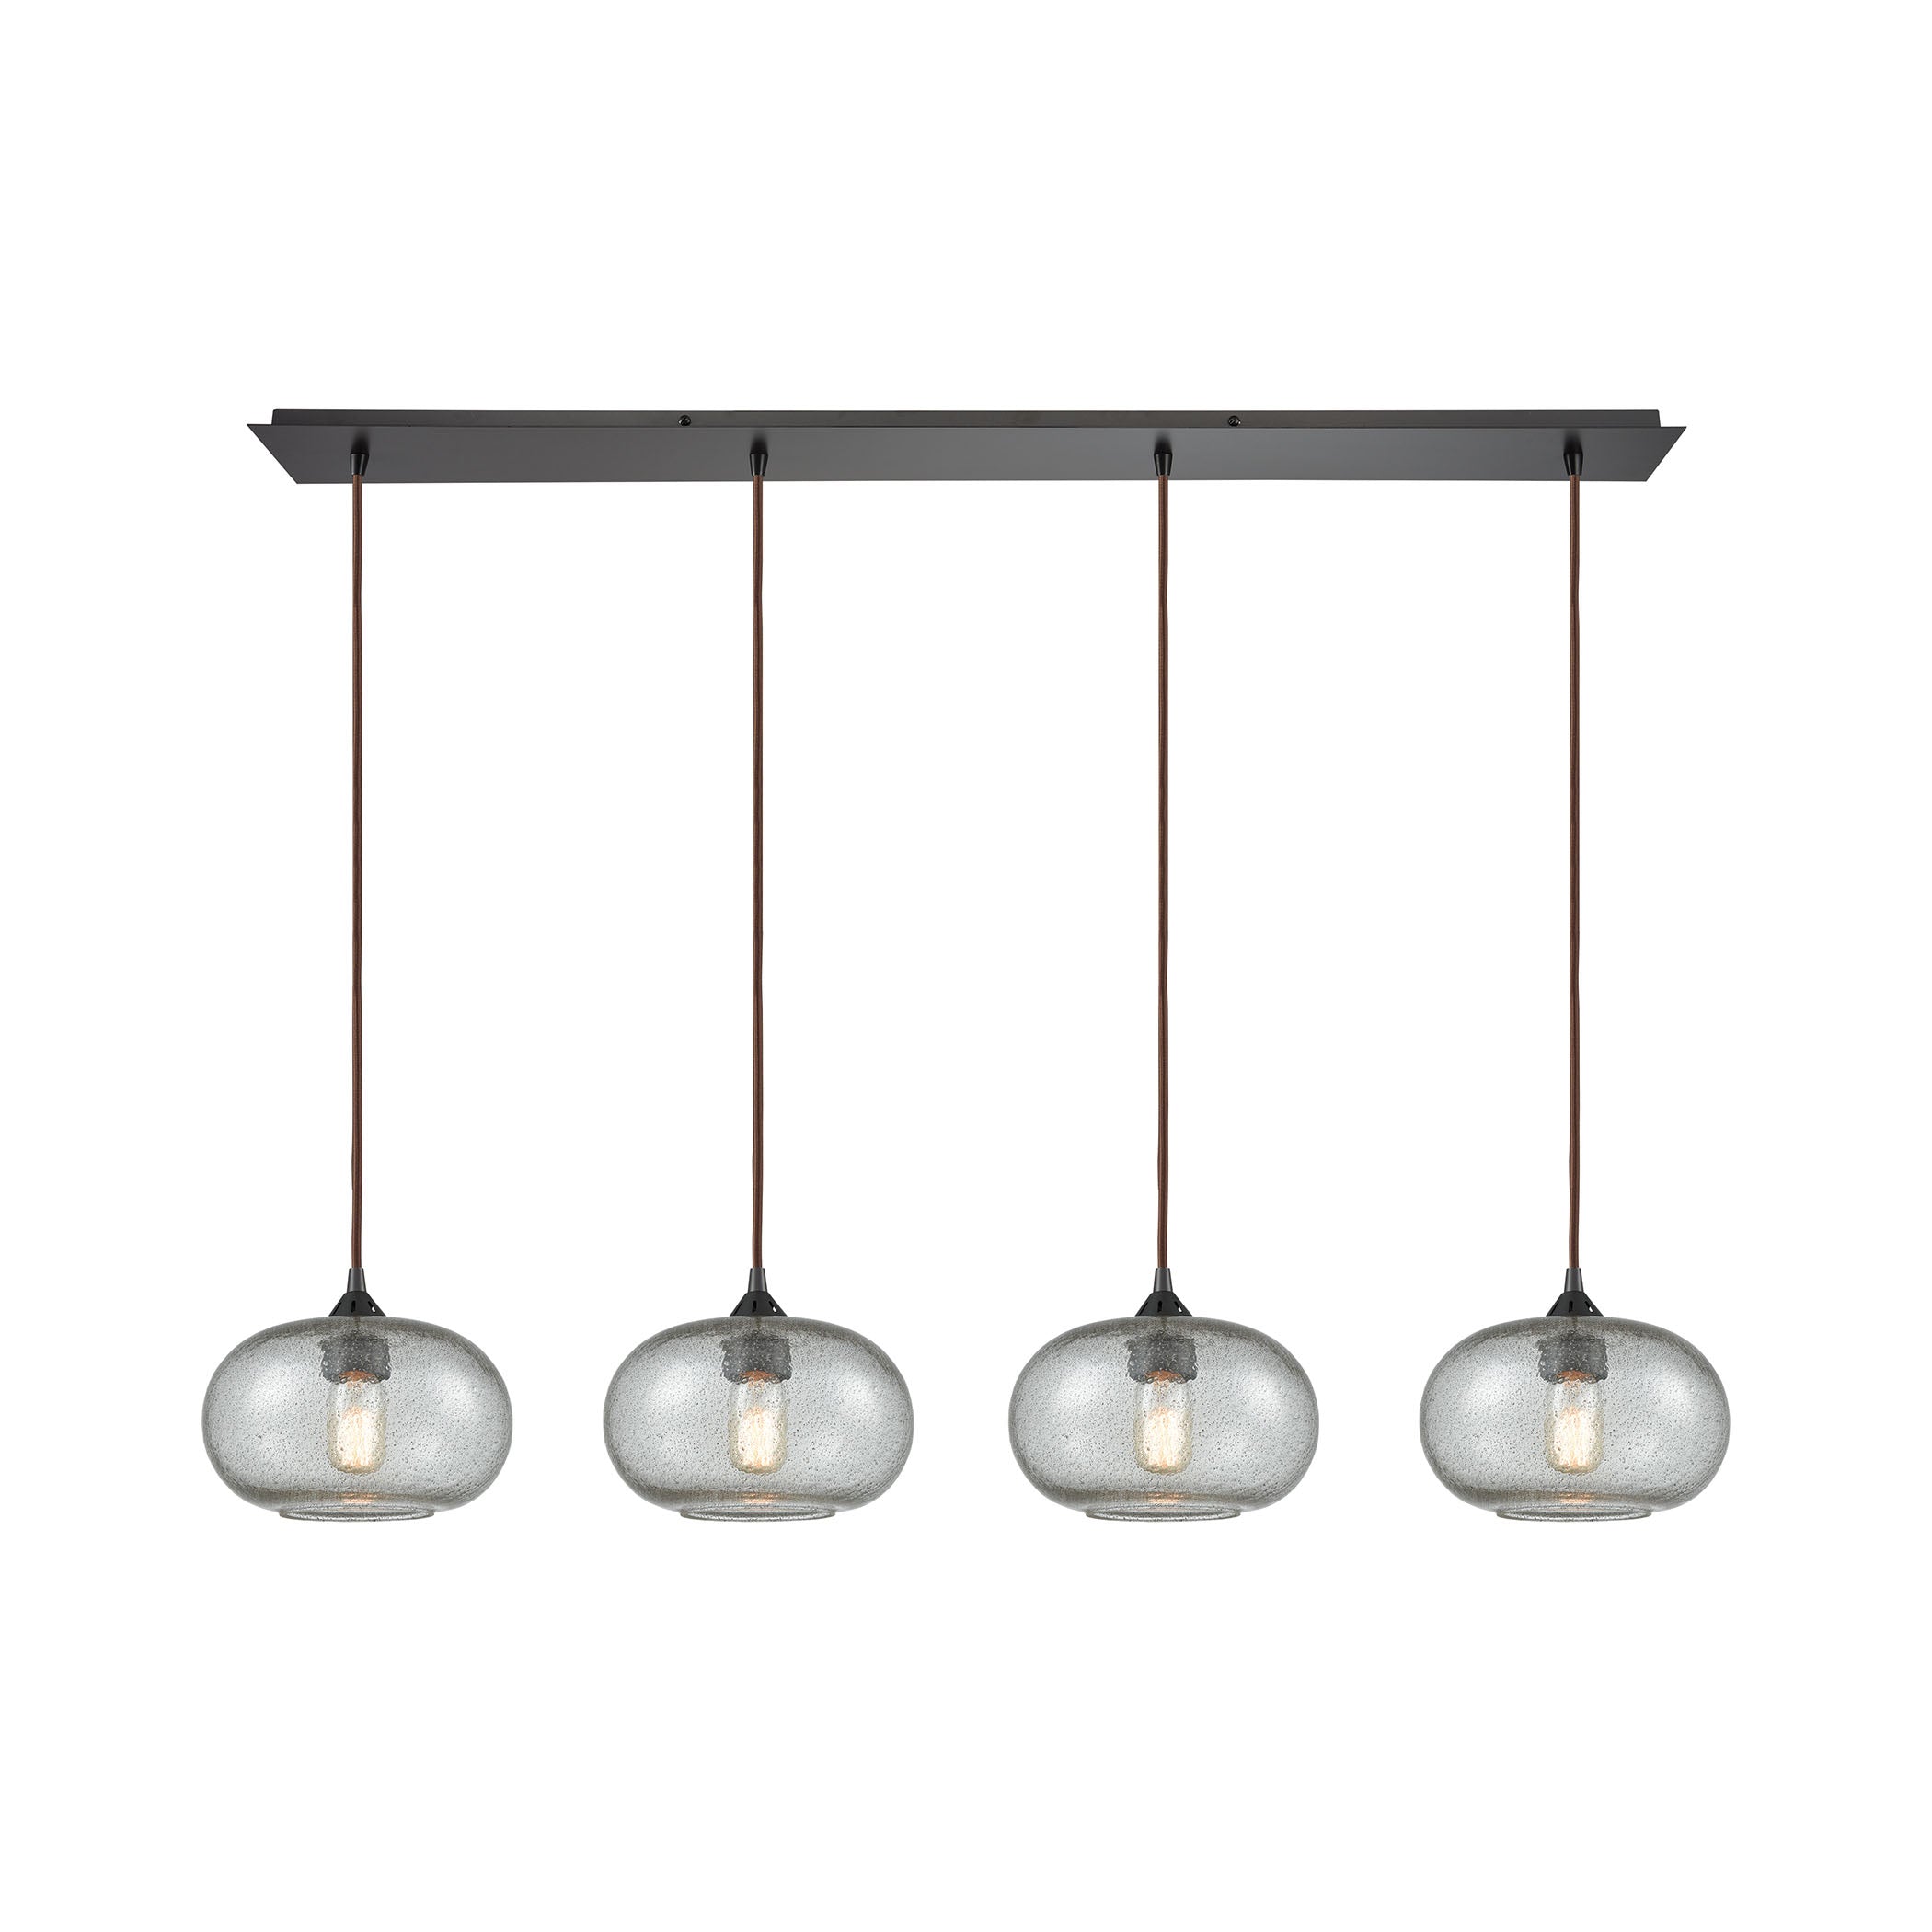 ELK Lighting 25124/4LP Volace 4-Light Linear Pendant Fixture in Oiled Bronze with Rotunde Gray Speckled Blown Glass